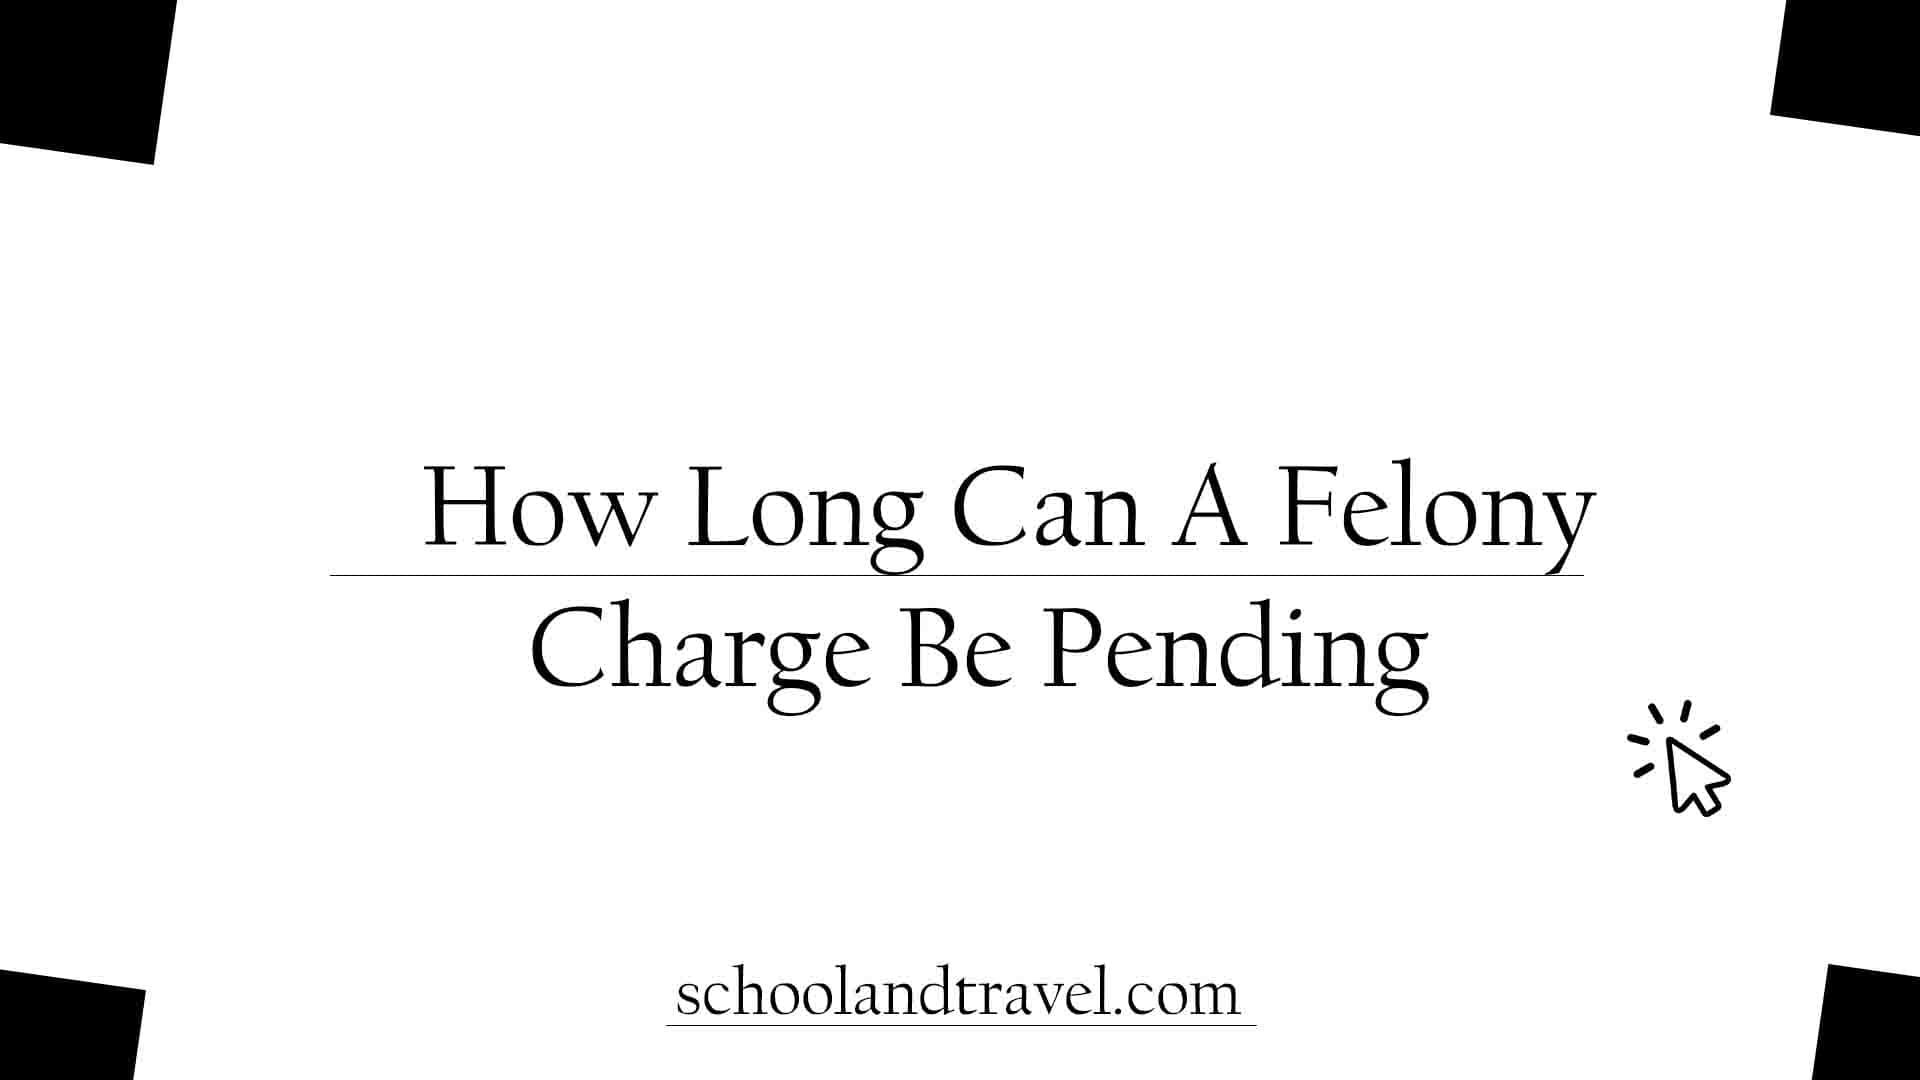 How Long Can A Felony Charge Be Pending?